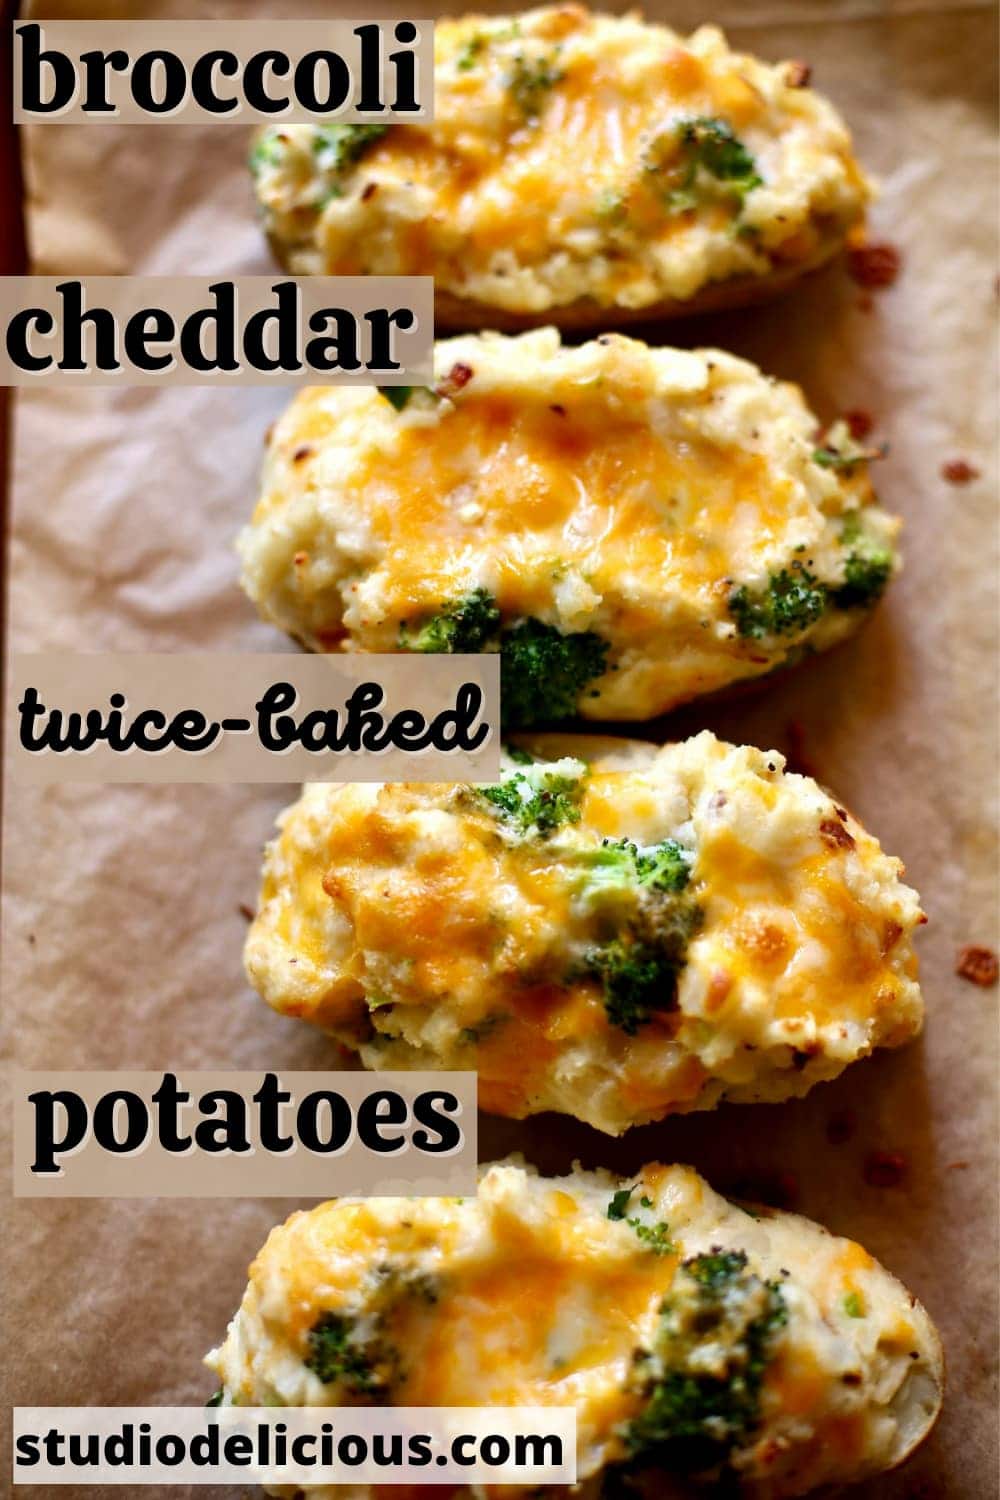 Baked Potatoes with Cheddar and Broccoli - Studio Delicious